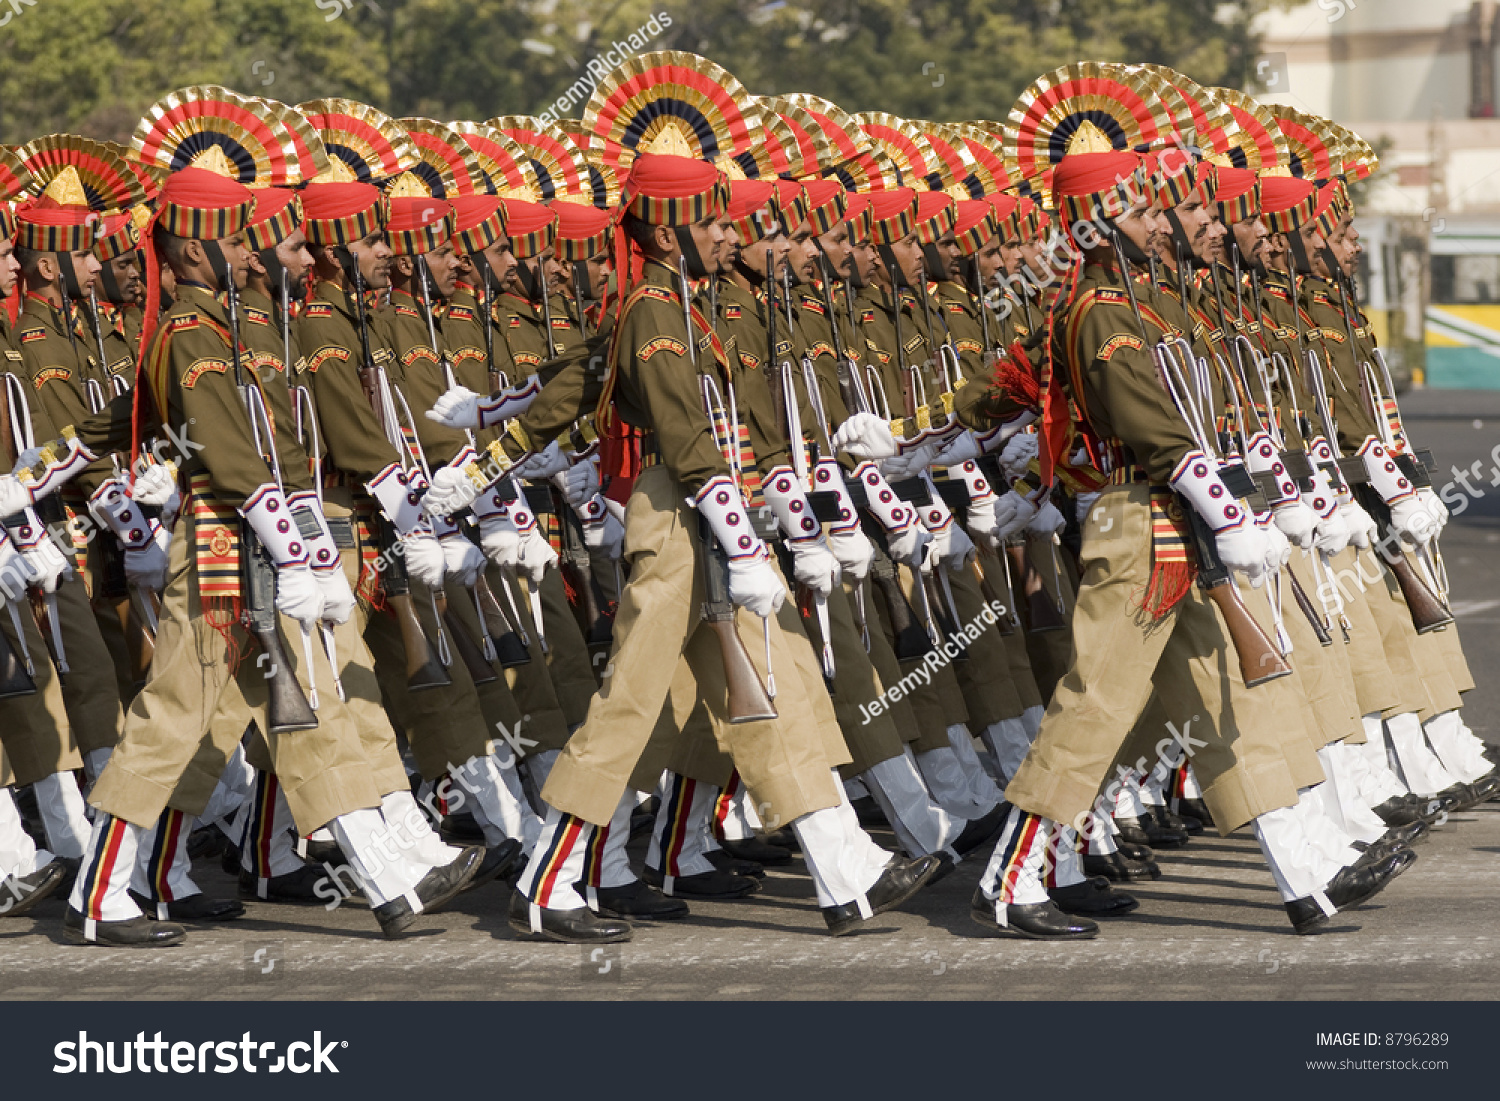 stock-photo-soldiers-of-the-indian-army-marching-down-the-raj-path-in-preparation-for-the-republic-day-parade-8796289.jpg